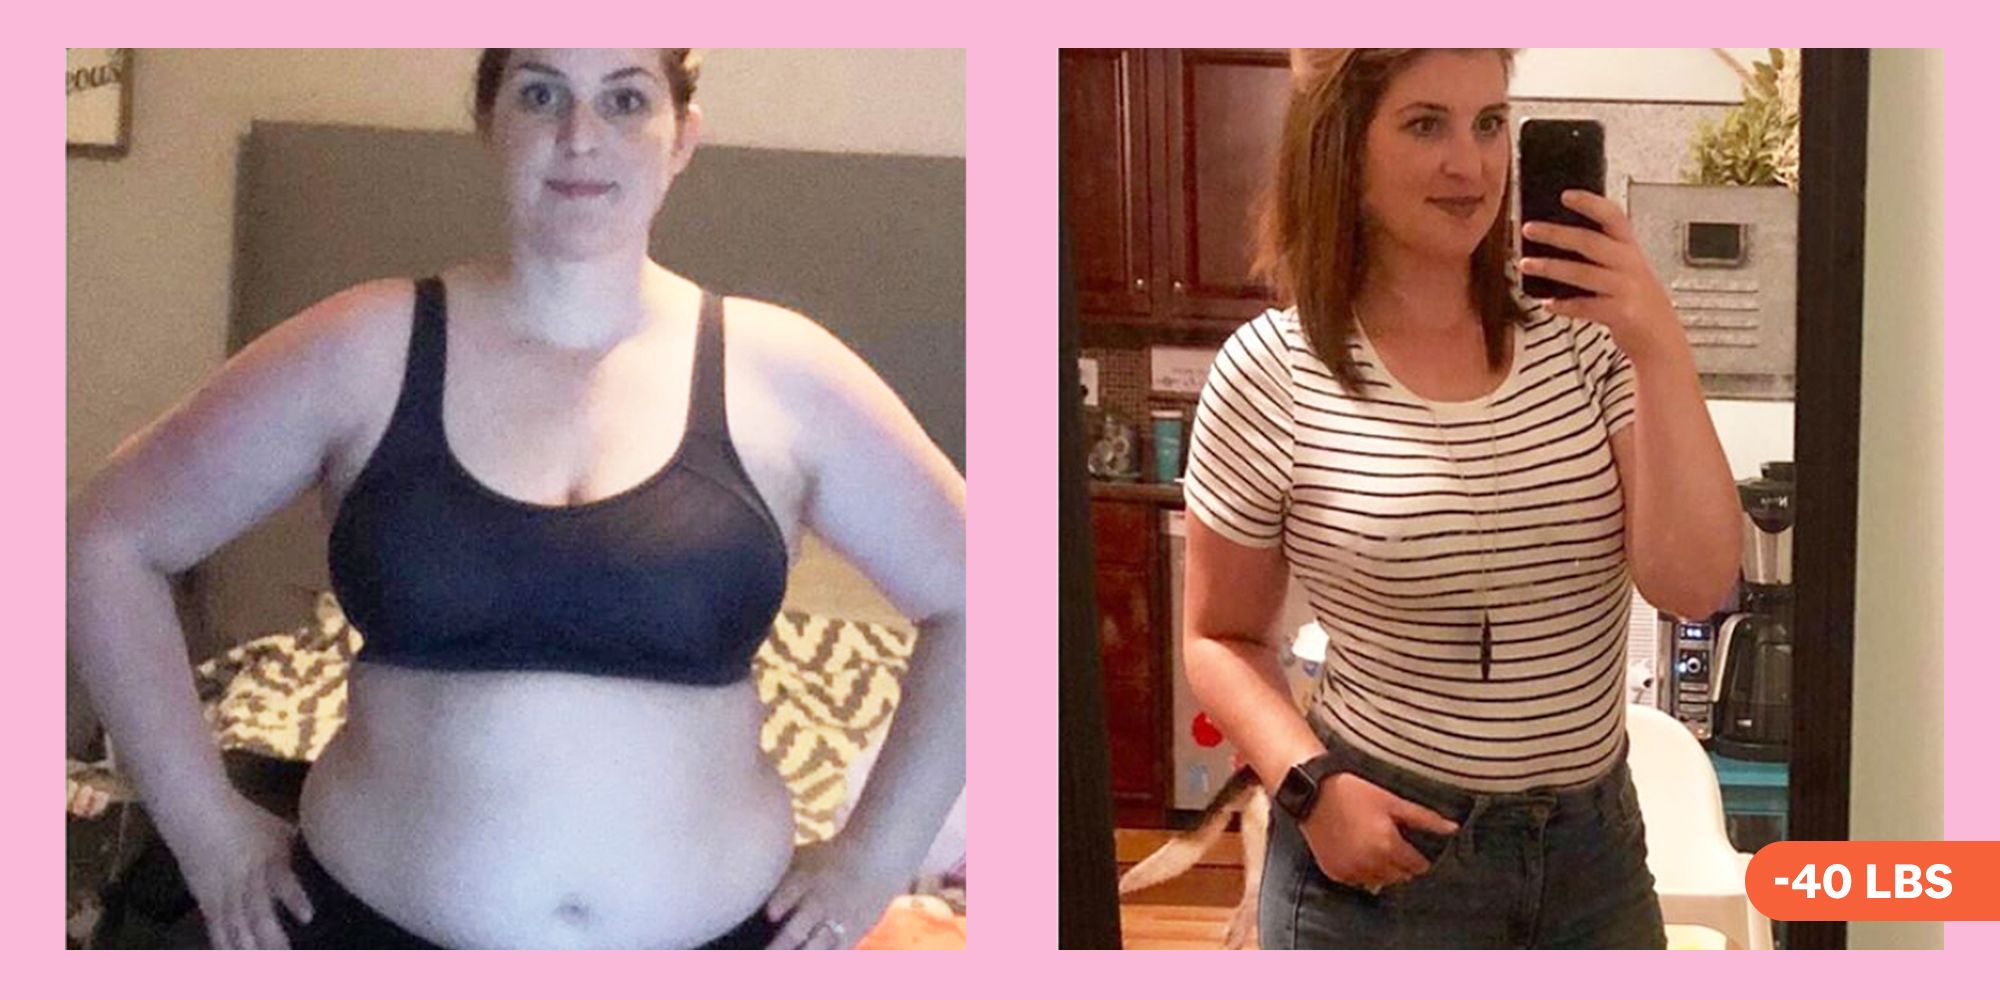 The Noom Diet Plan Helped Me Lose 40 Lbs. And Keep It Off